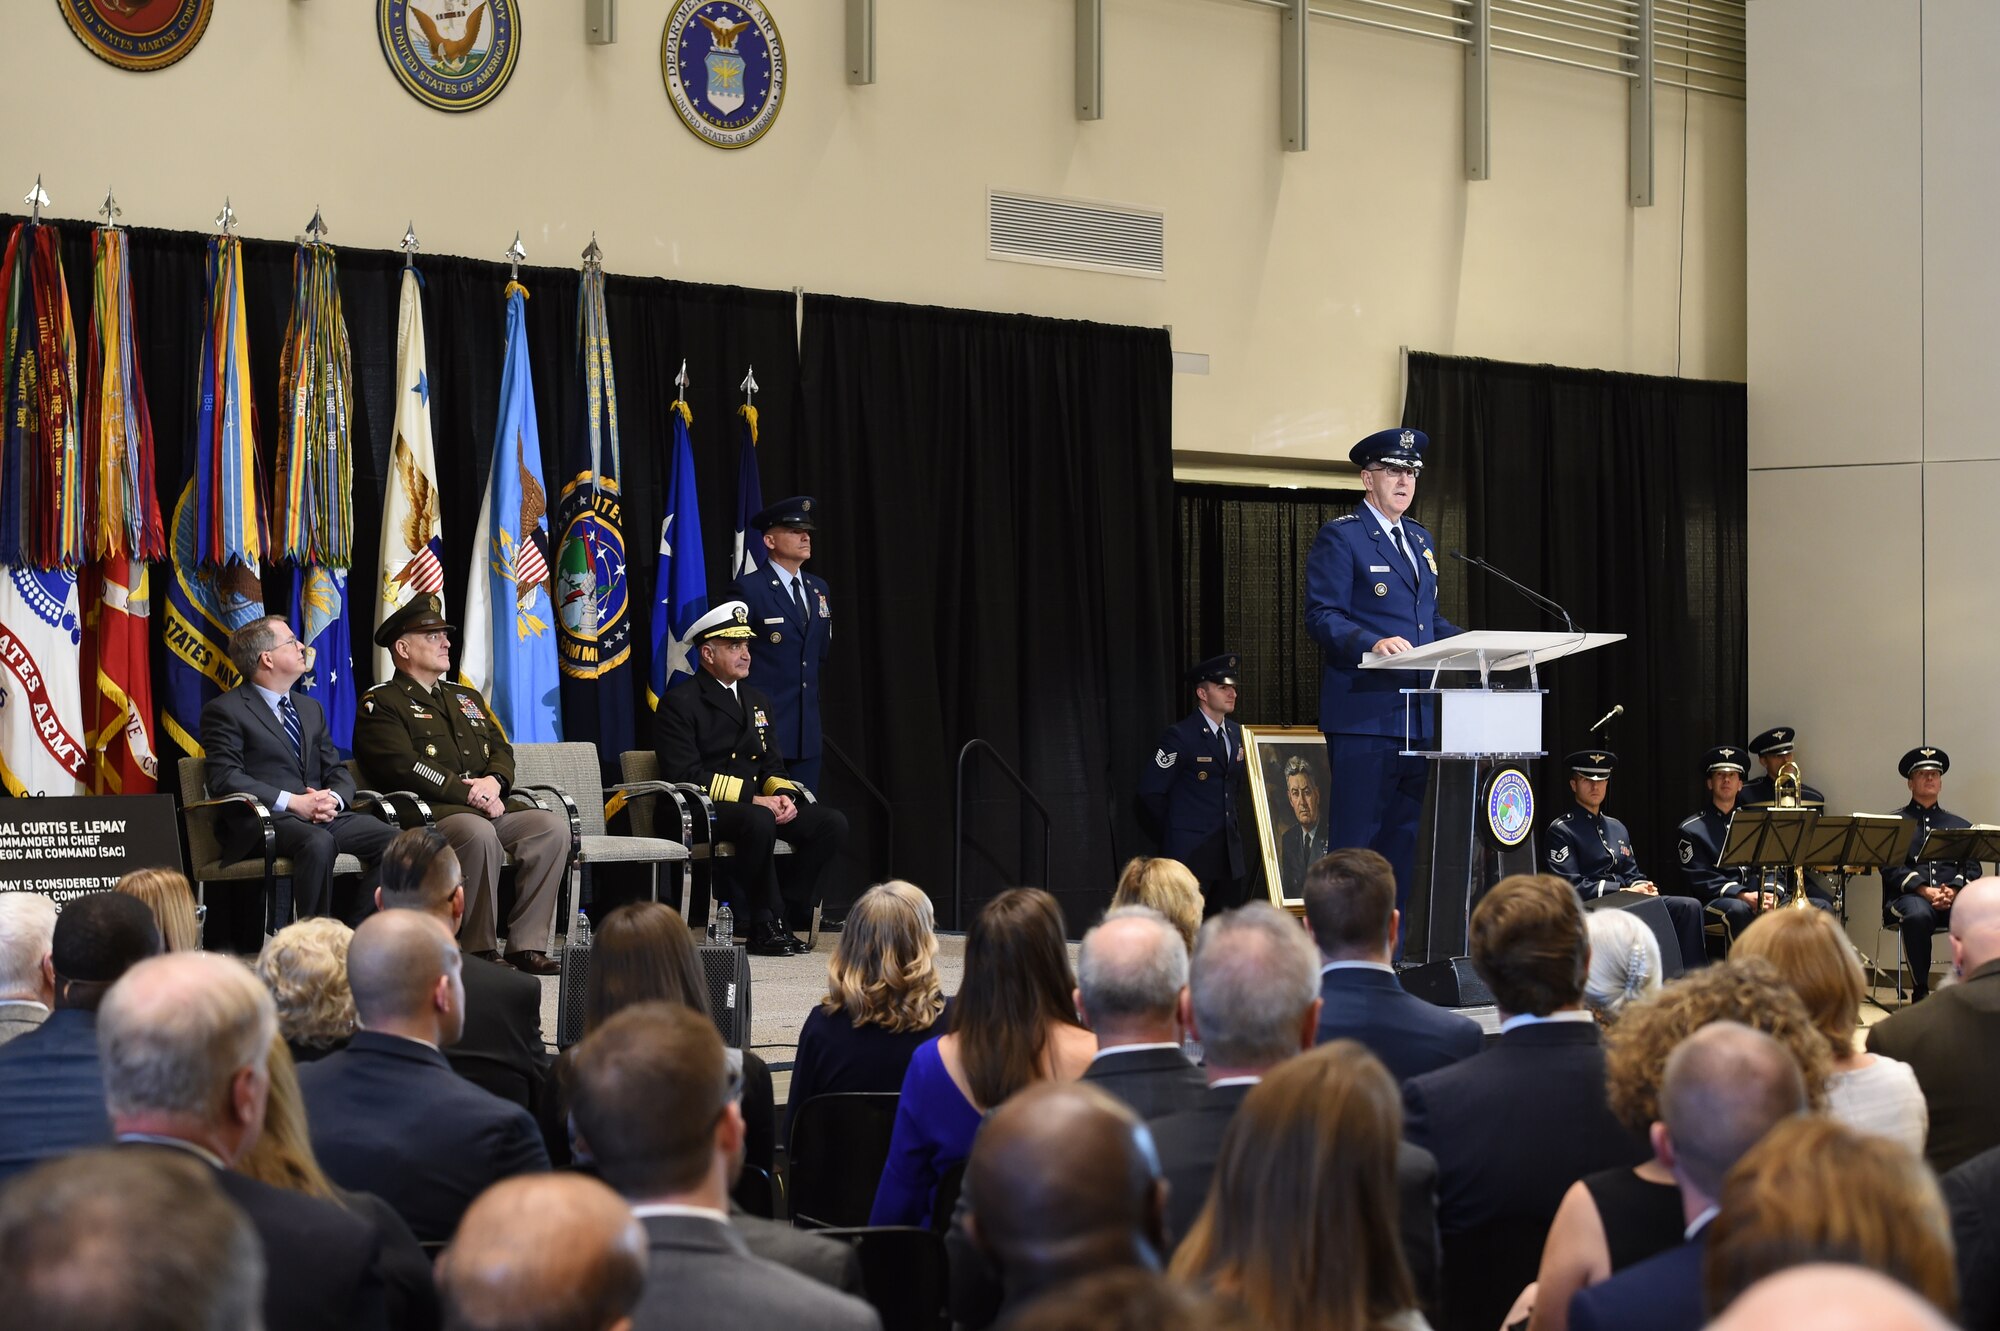 U.S. Air Force Gen. John Hyten, outgoing commander of U.S. Strategic Command (USSTRATCOM), provides remarks during USSTRATCOM's change of command ceremony at Offutt Air Force Base, Neb., Nov. 18, 2019. USSTRATCOM is a global warfighting command and the ultimate guarantor of national and allied security with forces and capability that underpin and enable all other joint force operations. (U.S. Air Force photo by Staff Sgt. Ian Hoachlander)